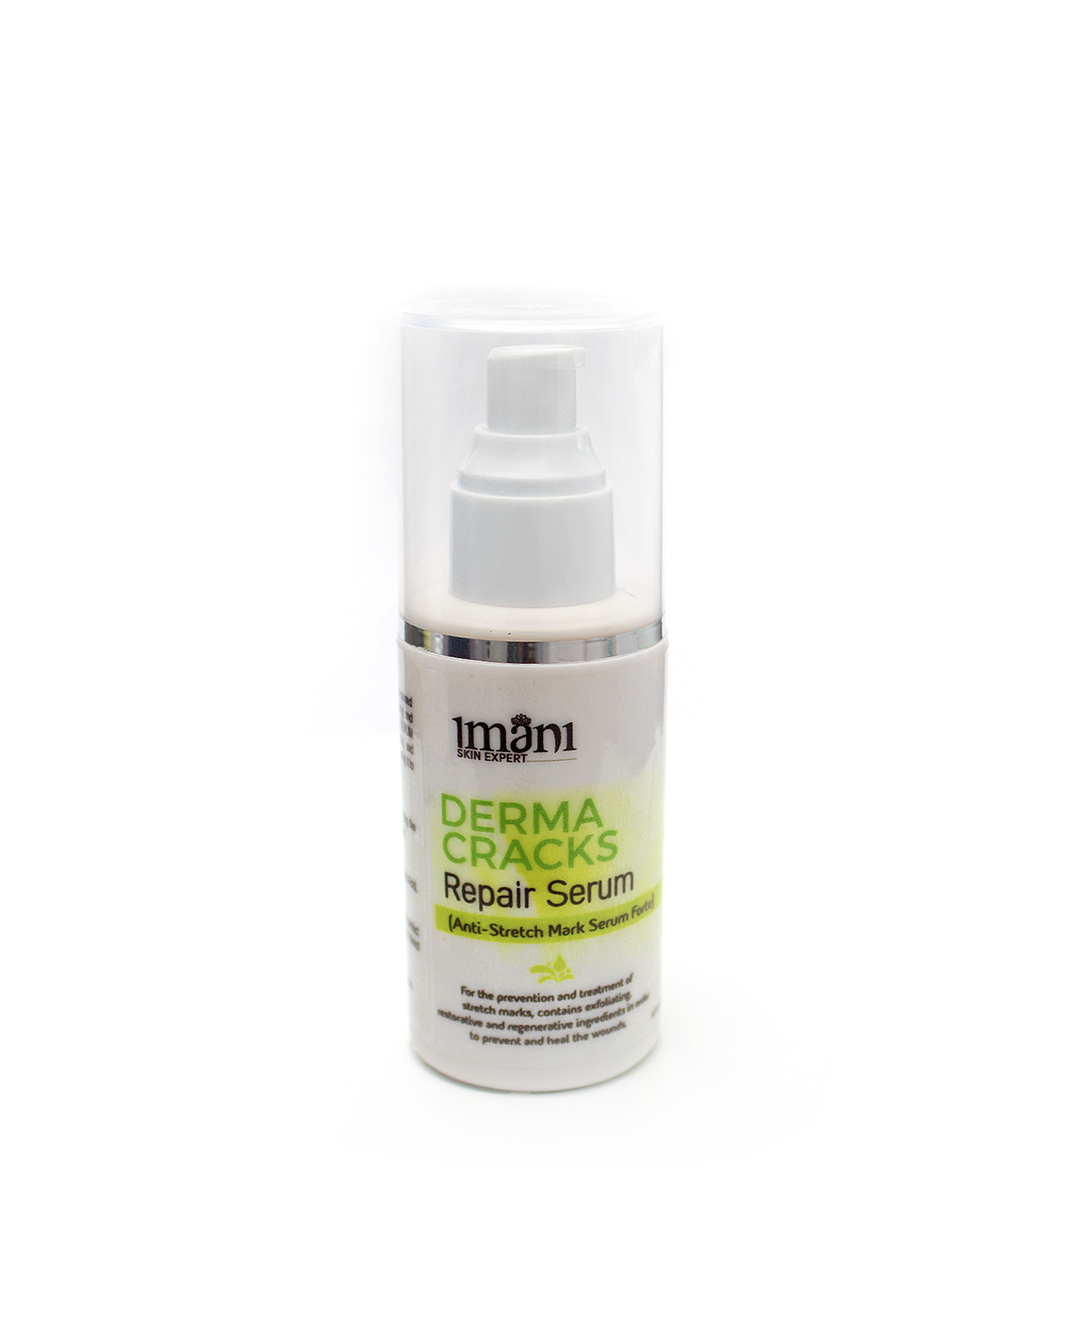 Buy Derma Cracks Repair Serum Online. Enjoy safe shopping online with our ecommerce. ✓ Best Price in Nigeria ✓ Fast Delivery & Express delivery Available. Also available at the Lagos and Abuja offices of Imani Aesthetic and Laser Clinic